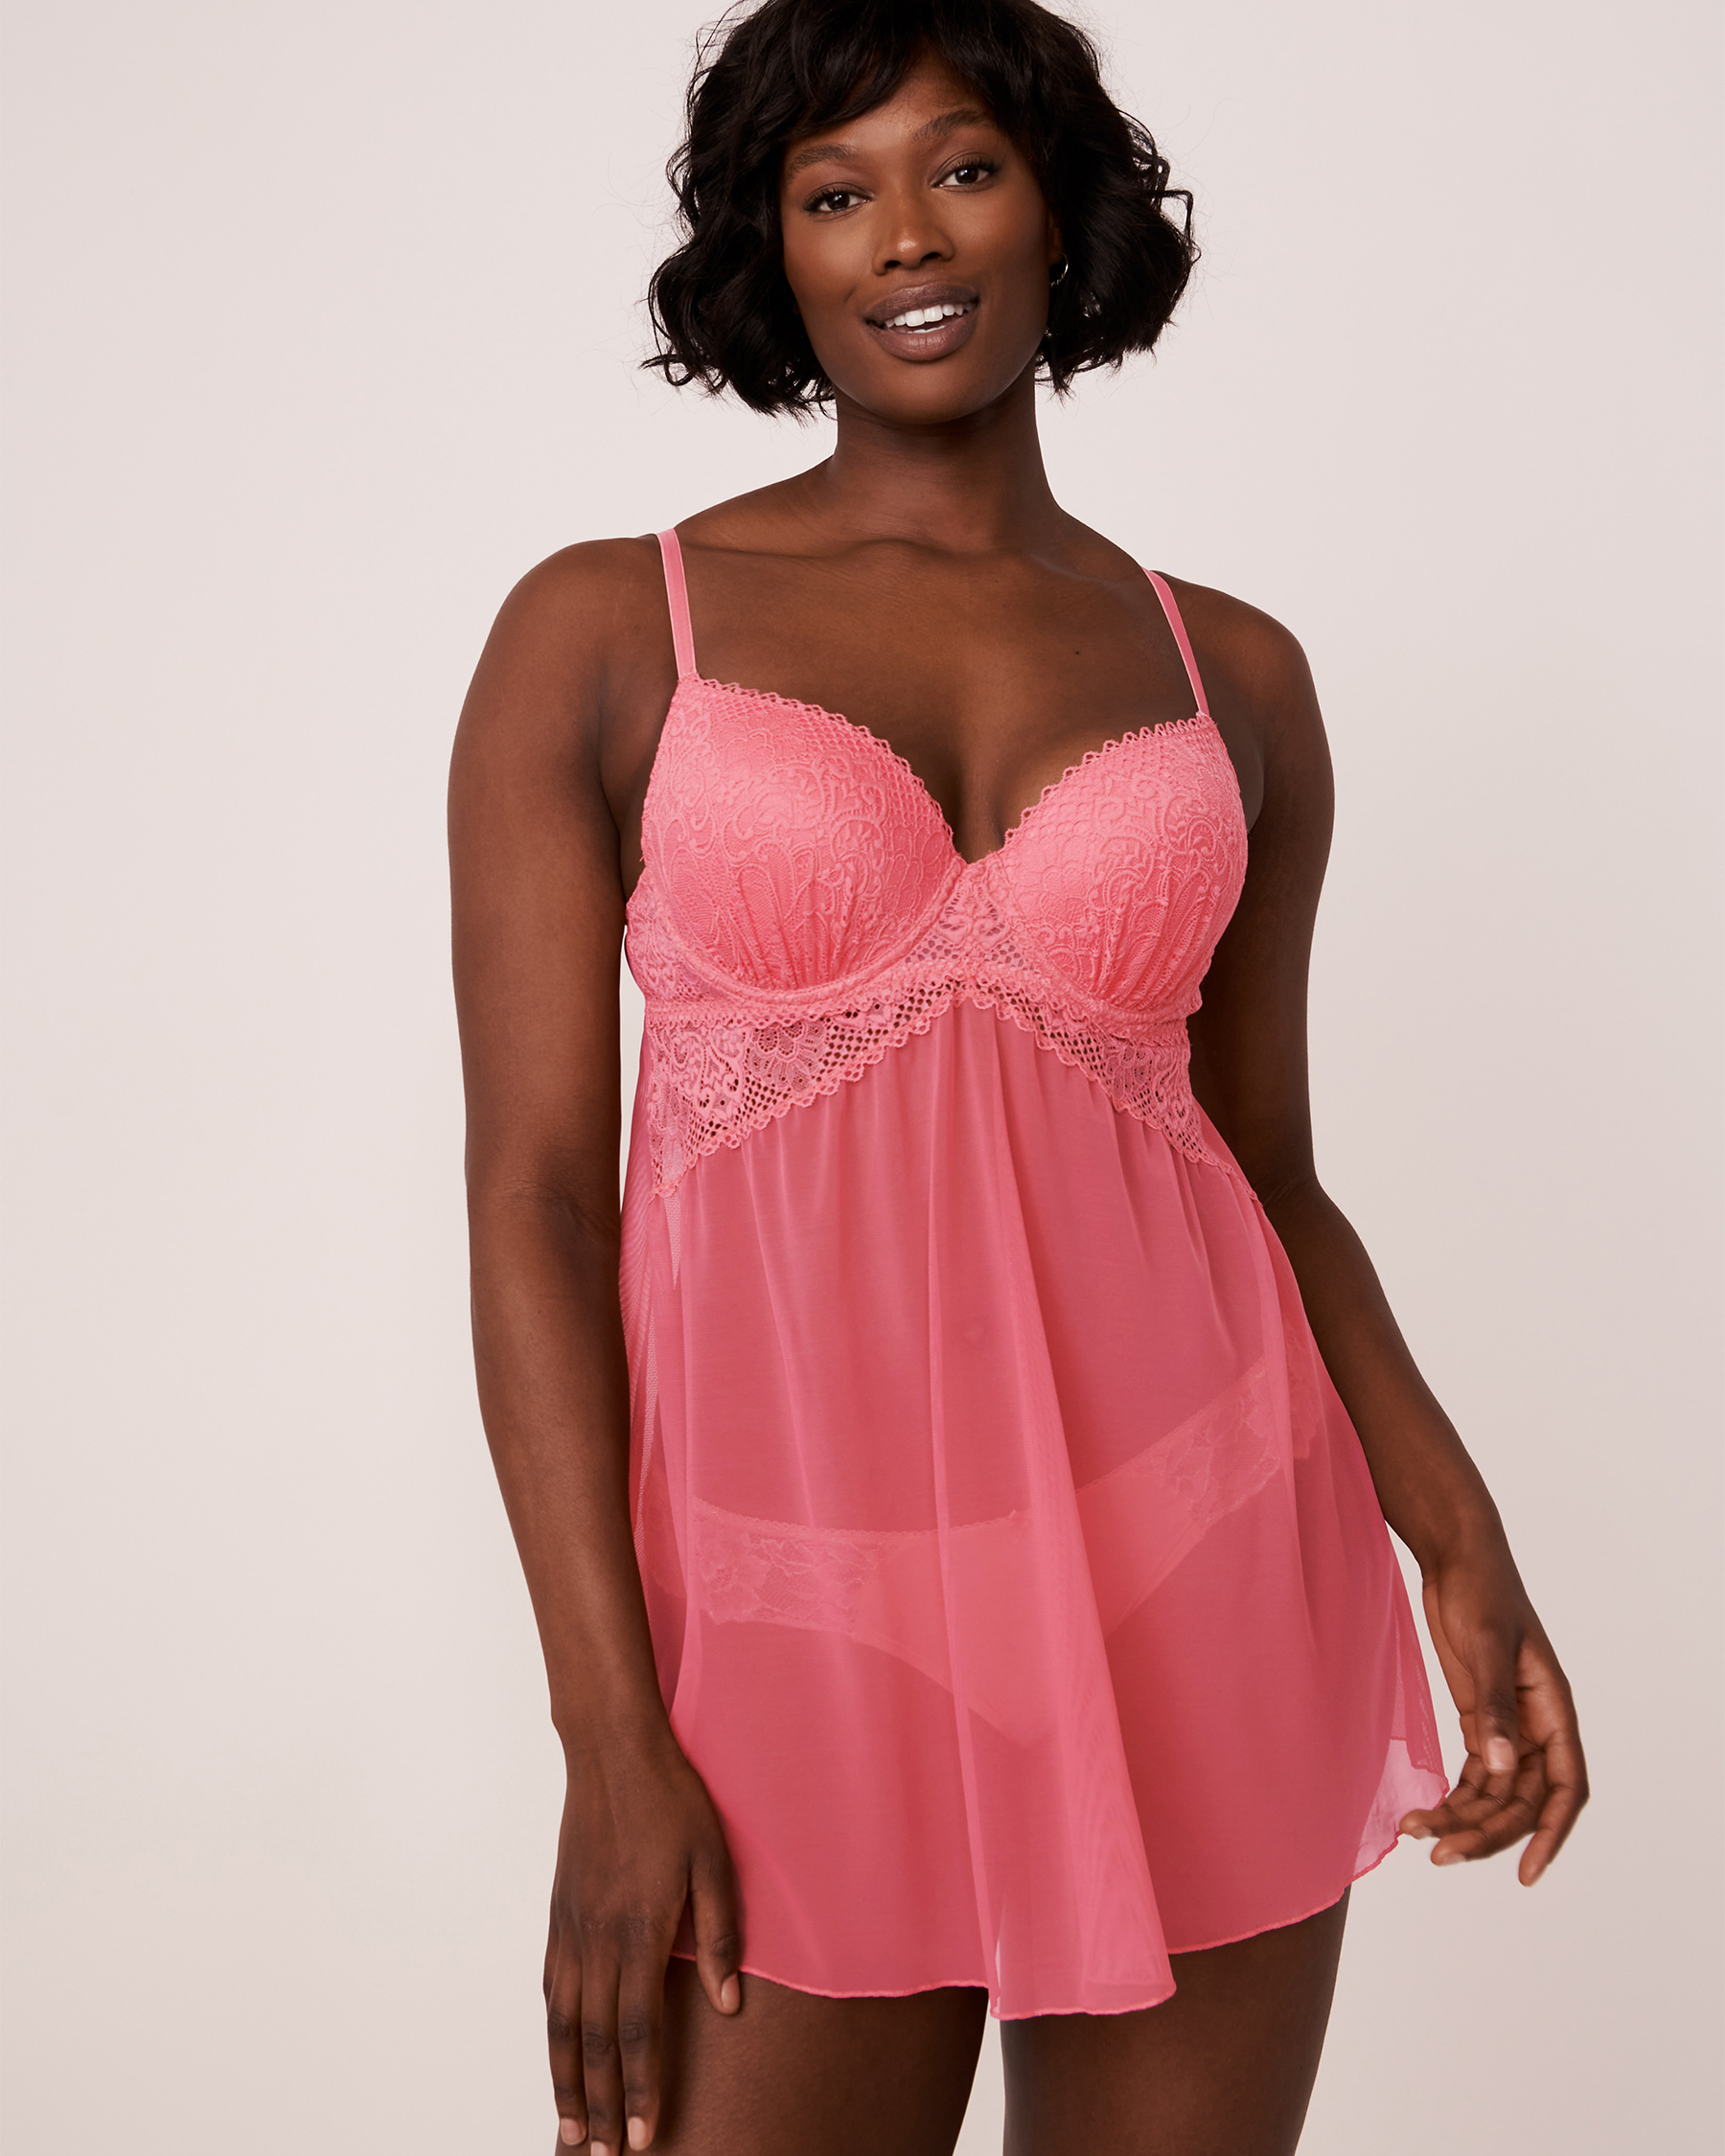 LA VIE EN ROSE Lace and Mesh Push-up Babydoll Candy pink 60500051 - View4